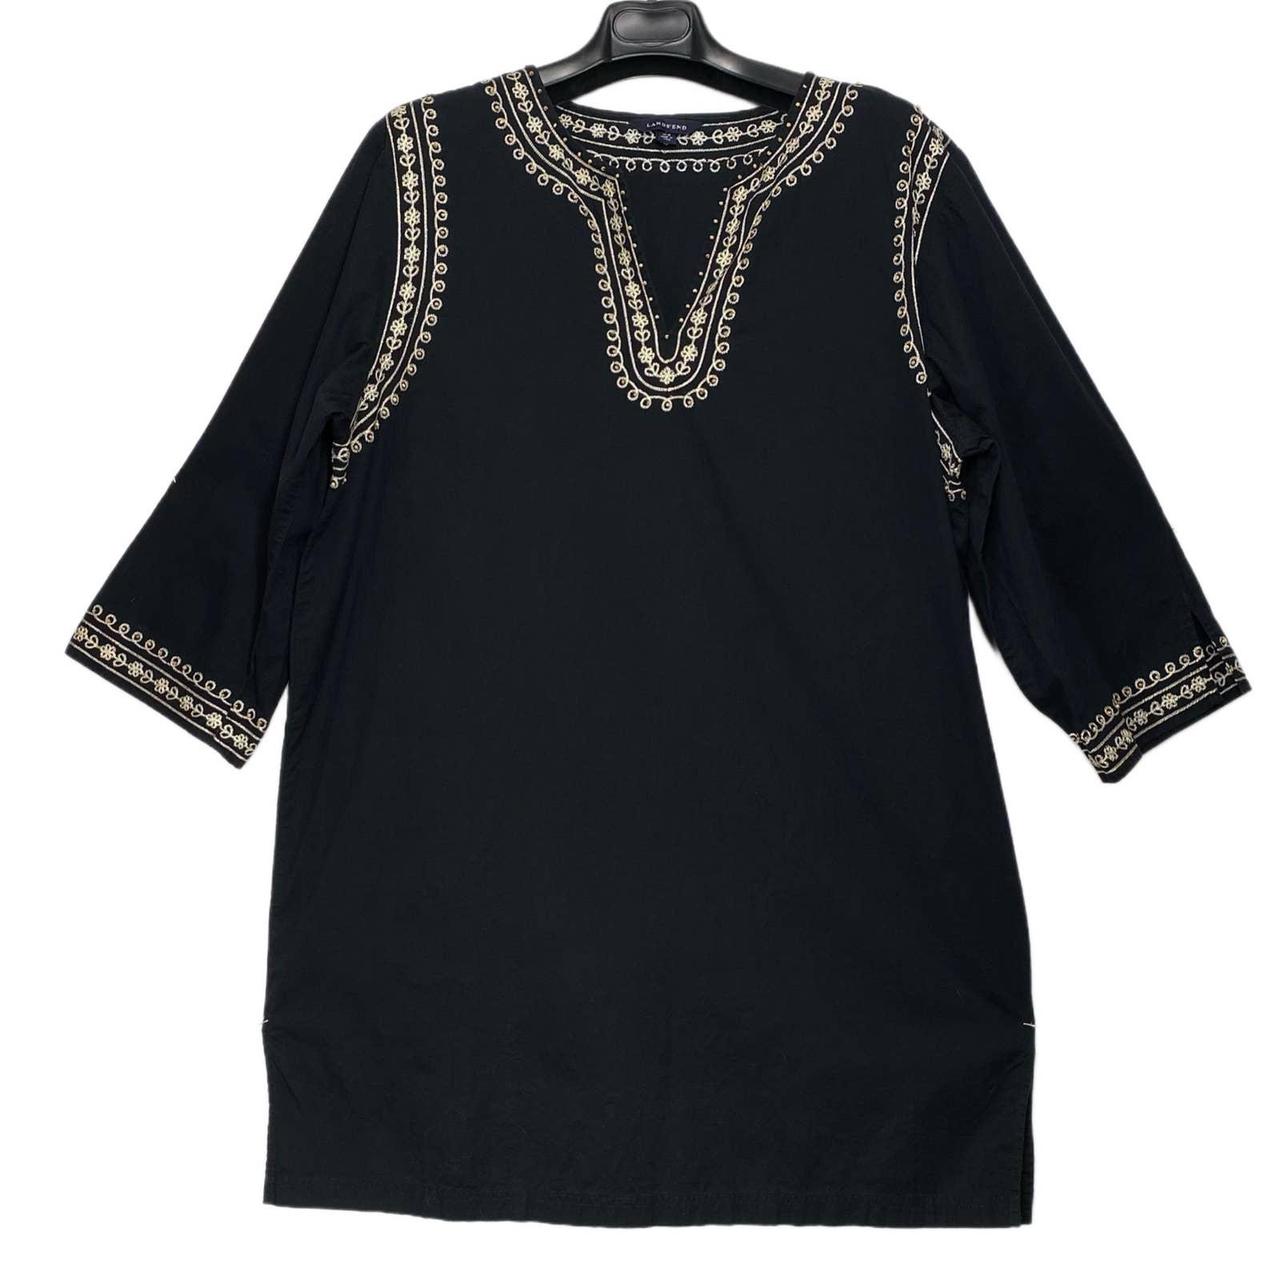 Lands End black tunic. Gold embroidery with natural